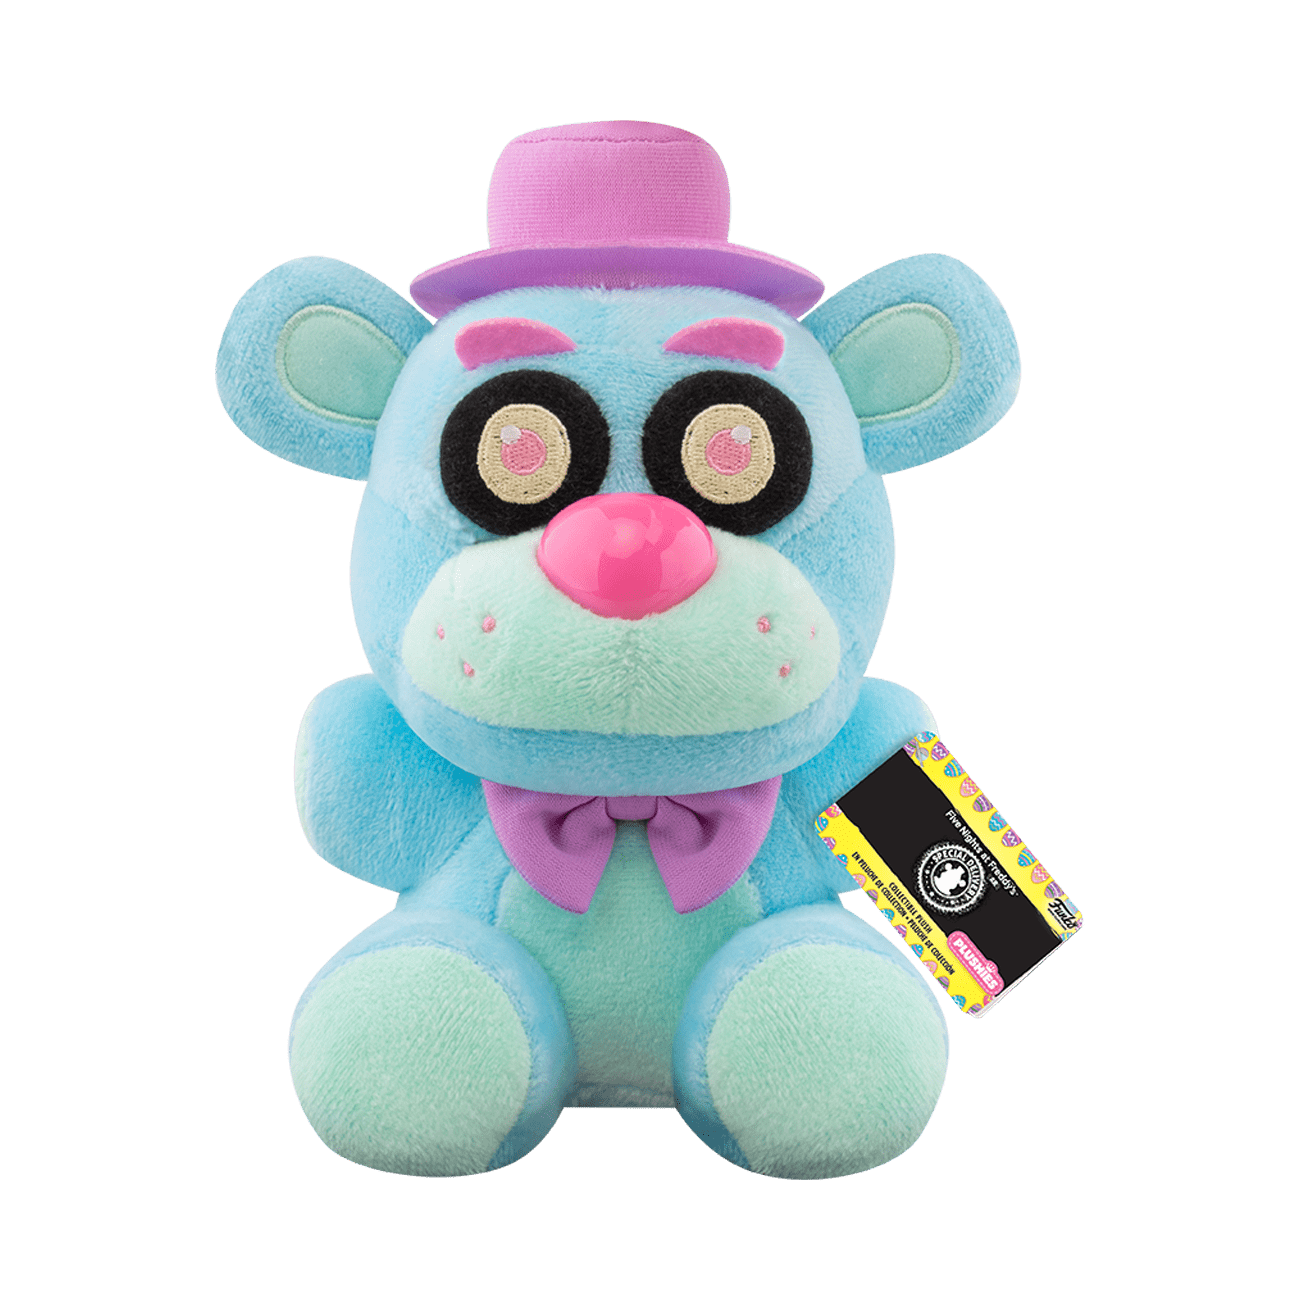  Funko Plush: Five Nights at Freddy's (FNAF) Springway-Foxy -  Purple - Collectible Soft Plush - Birthday Gift Idea - Official Merchandise  - Stuffed Plushie for Kids and Adults and Girlfriends : Toys & Games